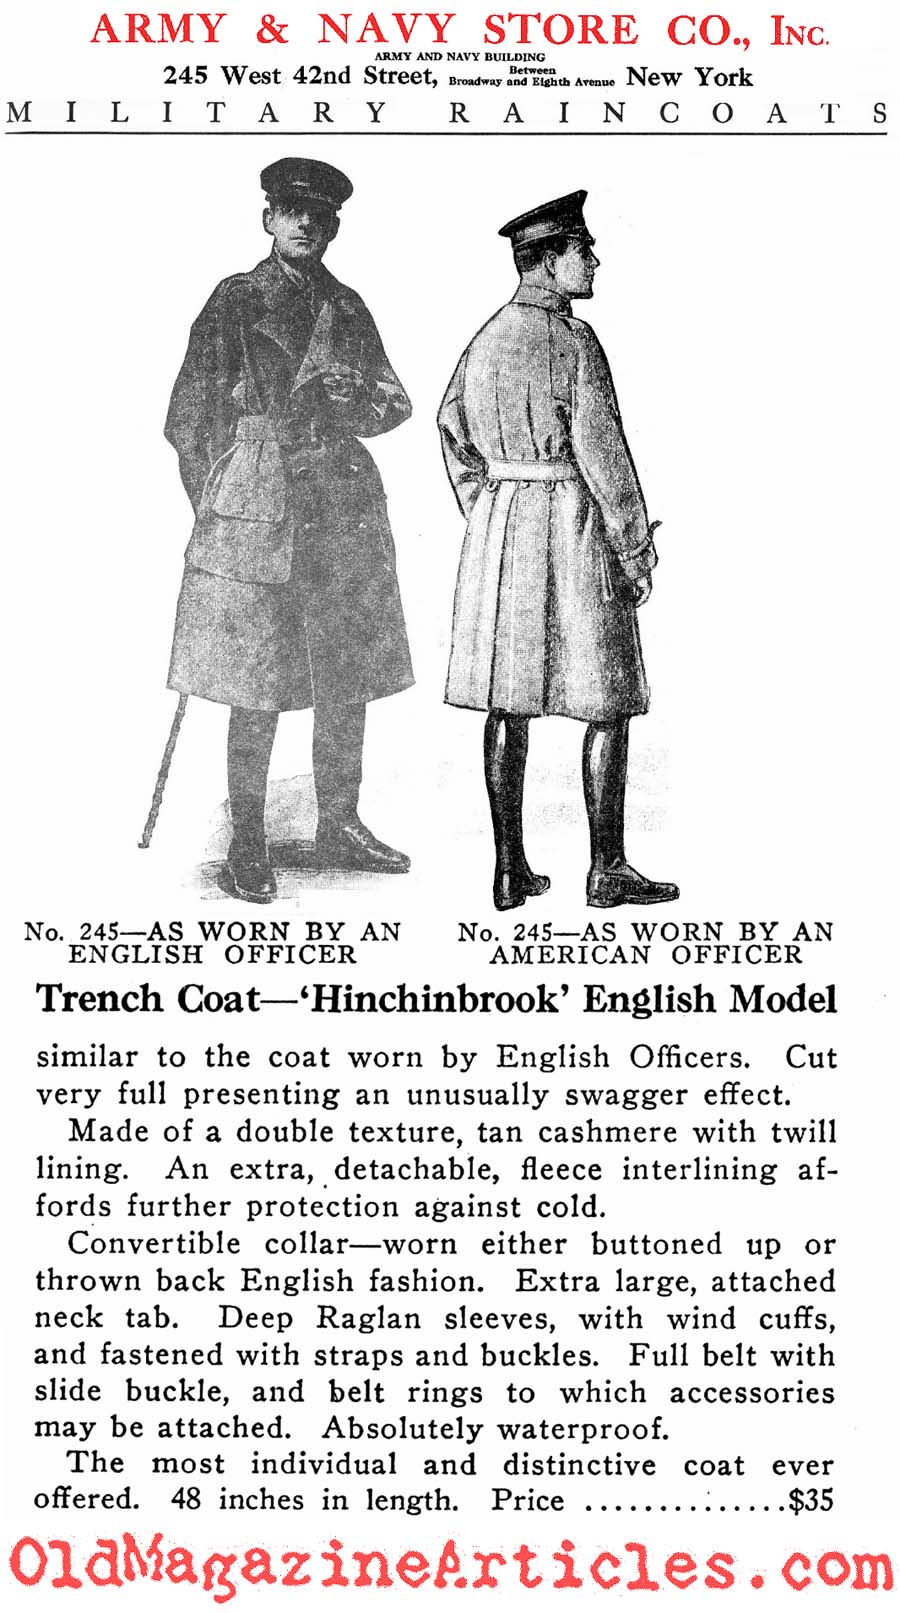 Trench Coat by Hitchinbrook  (Army and Navy Stores, 1918)